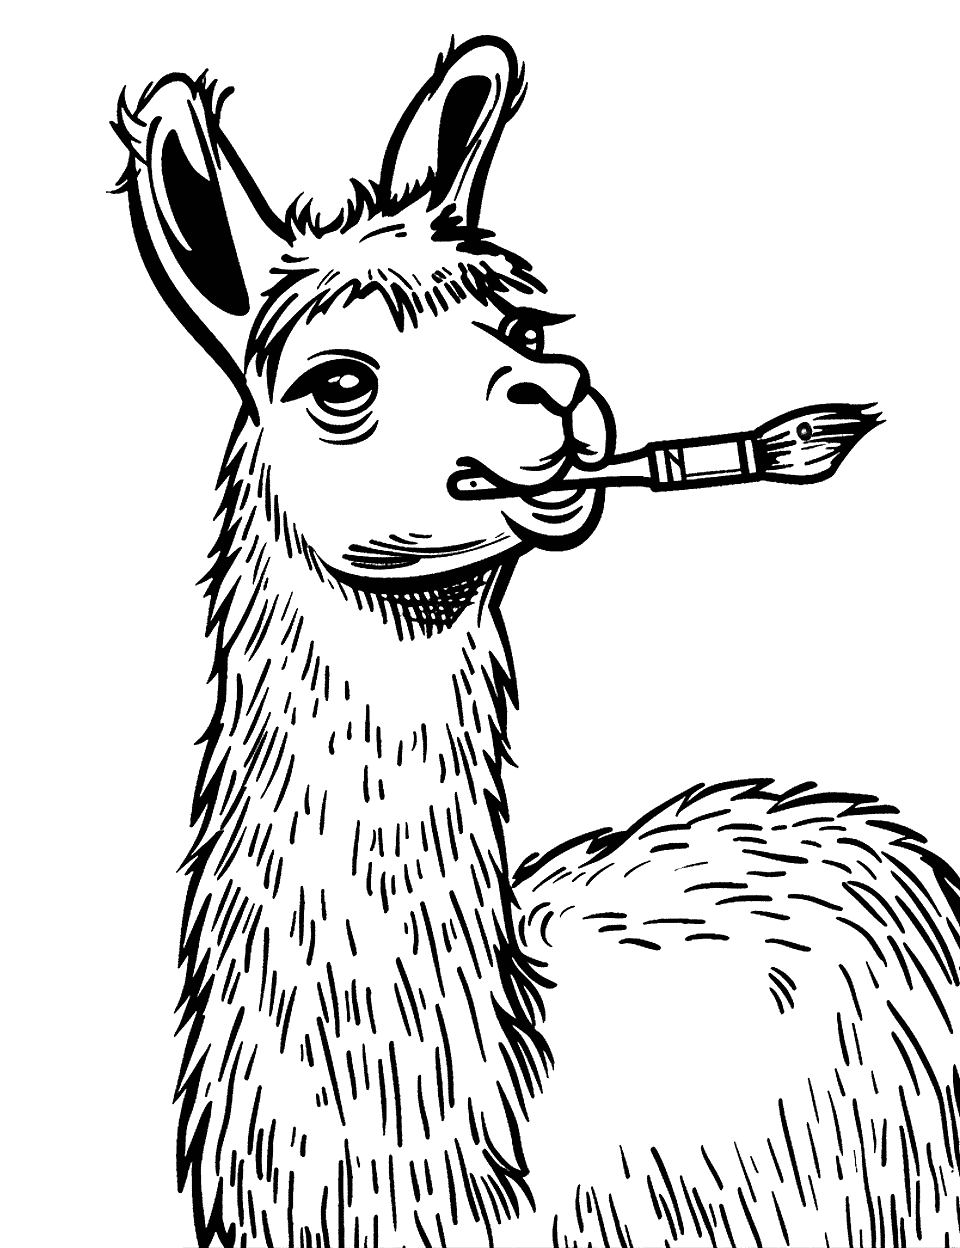 Llama with a Paintbrush Coloring Page - A creative llama holding a paintbrush in its mouth.